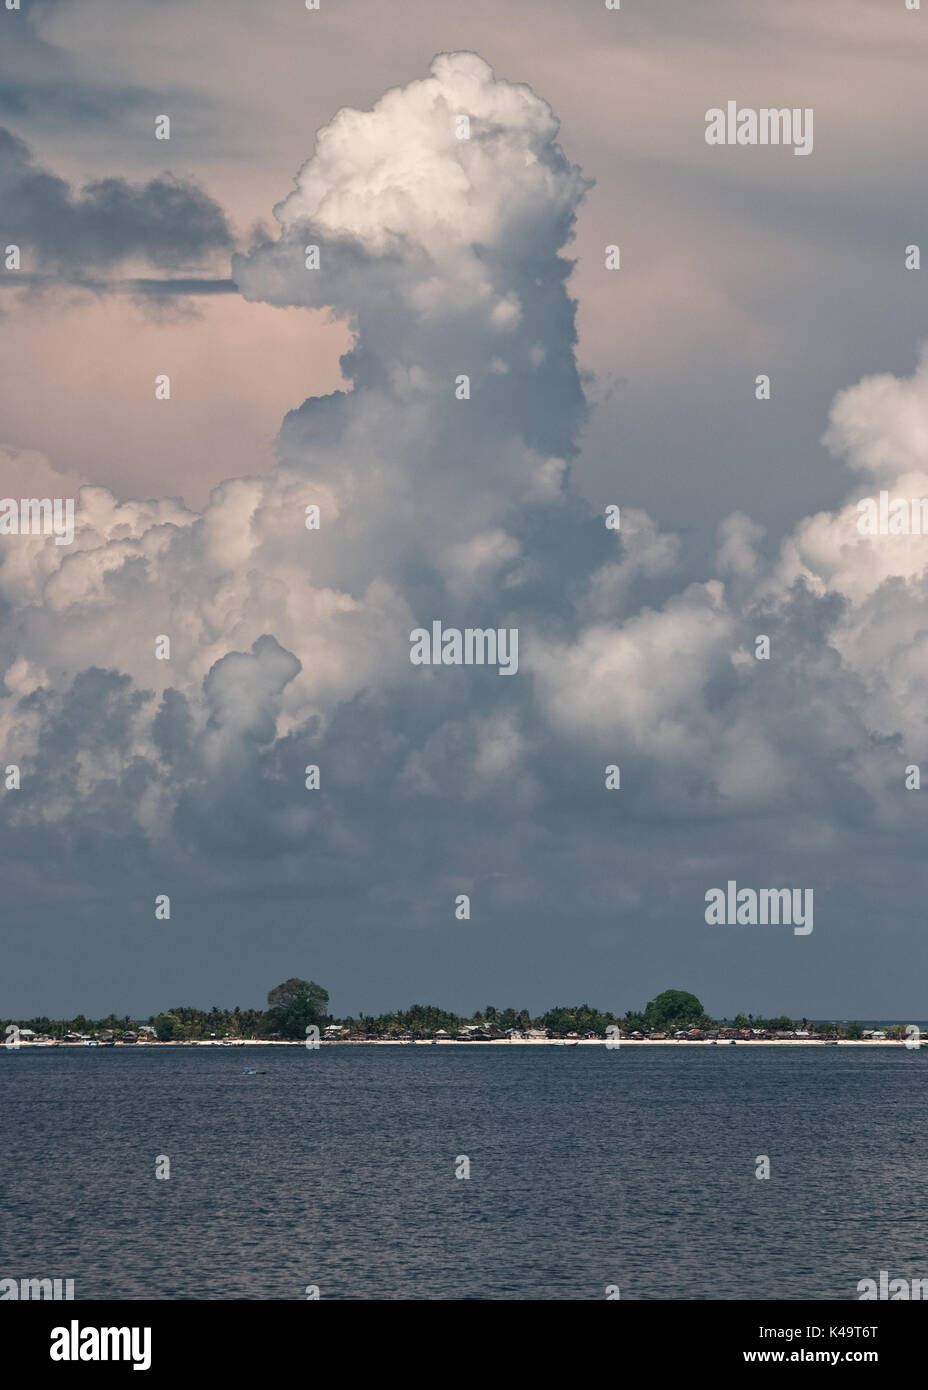 Towering Cumulus Clouds over Tropical Island in Indonesia Stock Photo